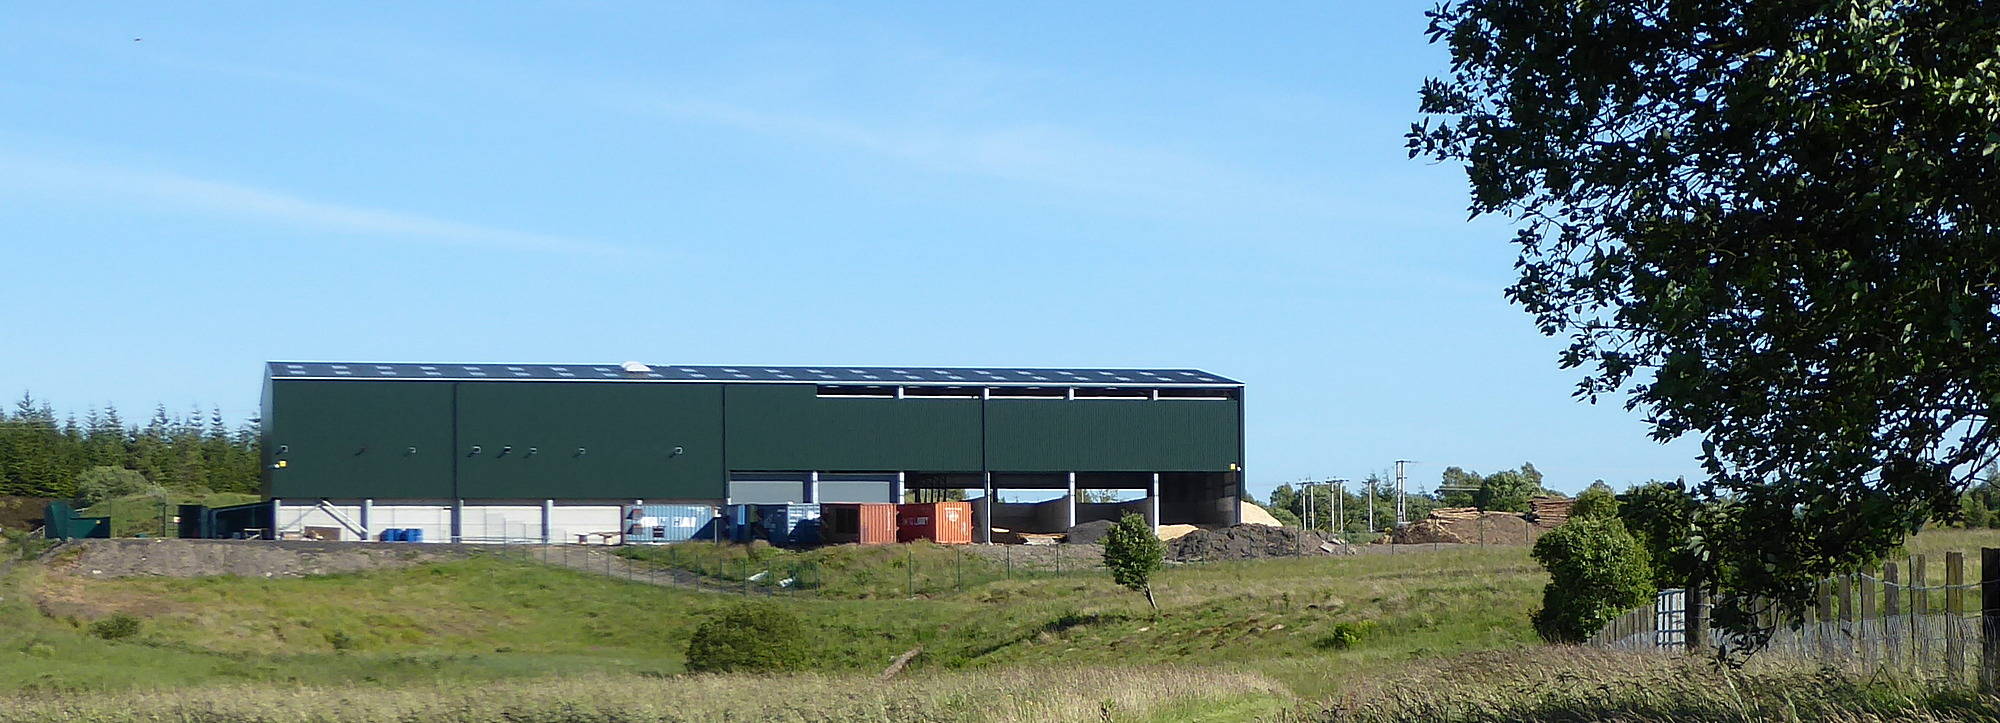 The new CHP (Combined Heat and Power) plant built and operated by Holz Energie UK at Poniel. Date 24th June 2018